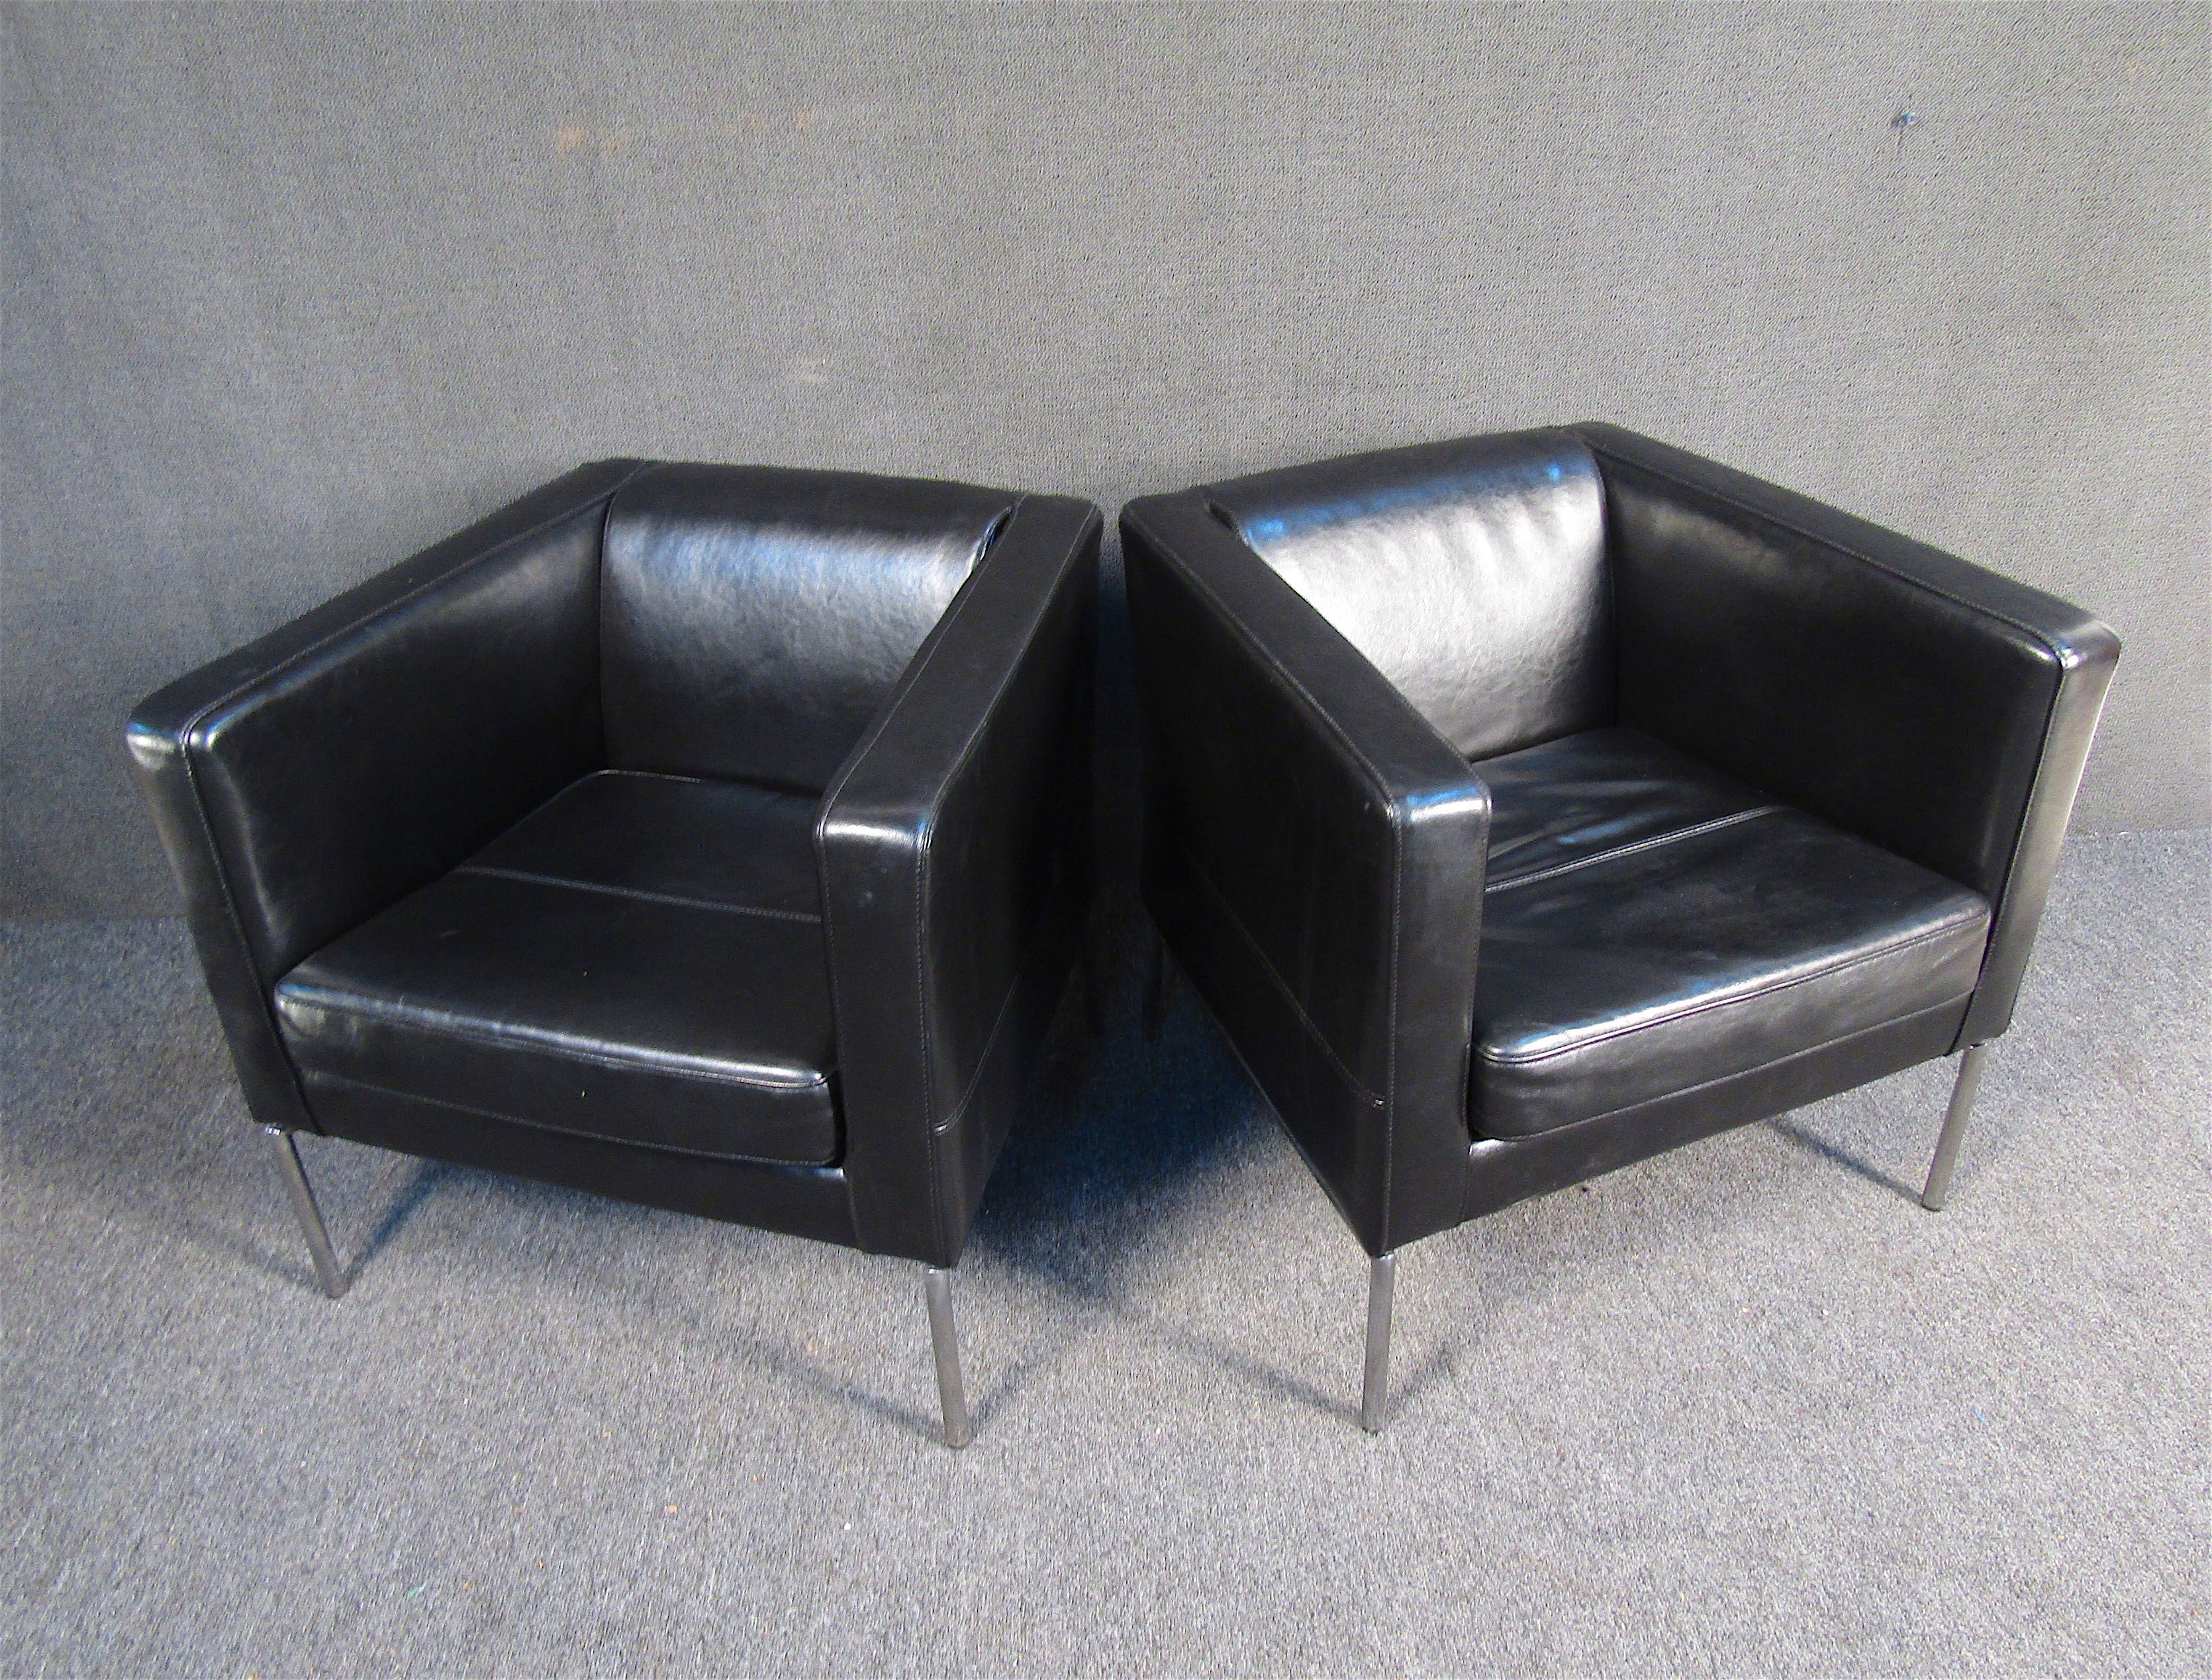 A sleek pair of black leather club chairs. The chairs are upholstered in supple black leather with metal legs. These chairs would be a great addition to any living or lounge area.

Please confirm item location with seller (NY/NJ).